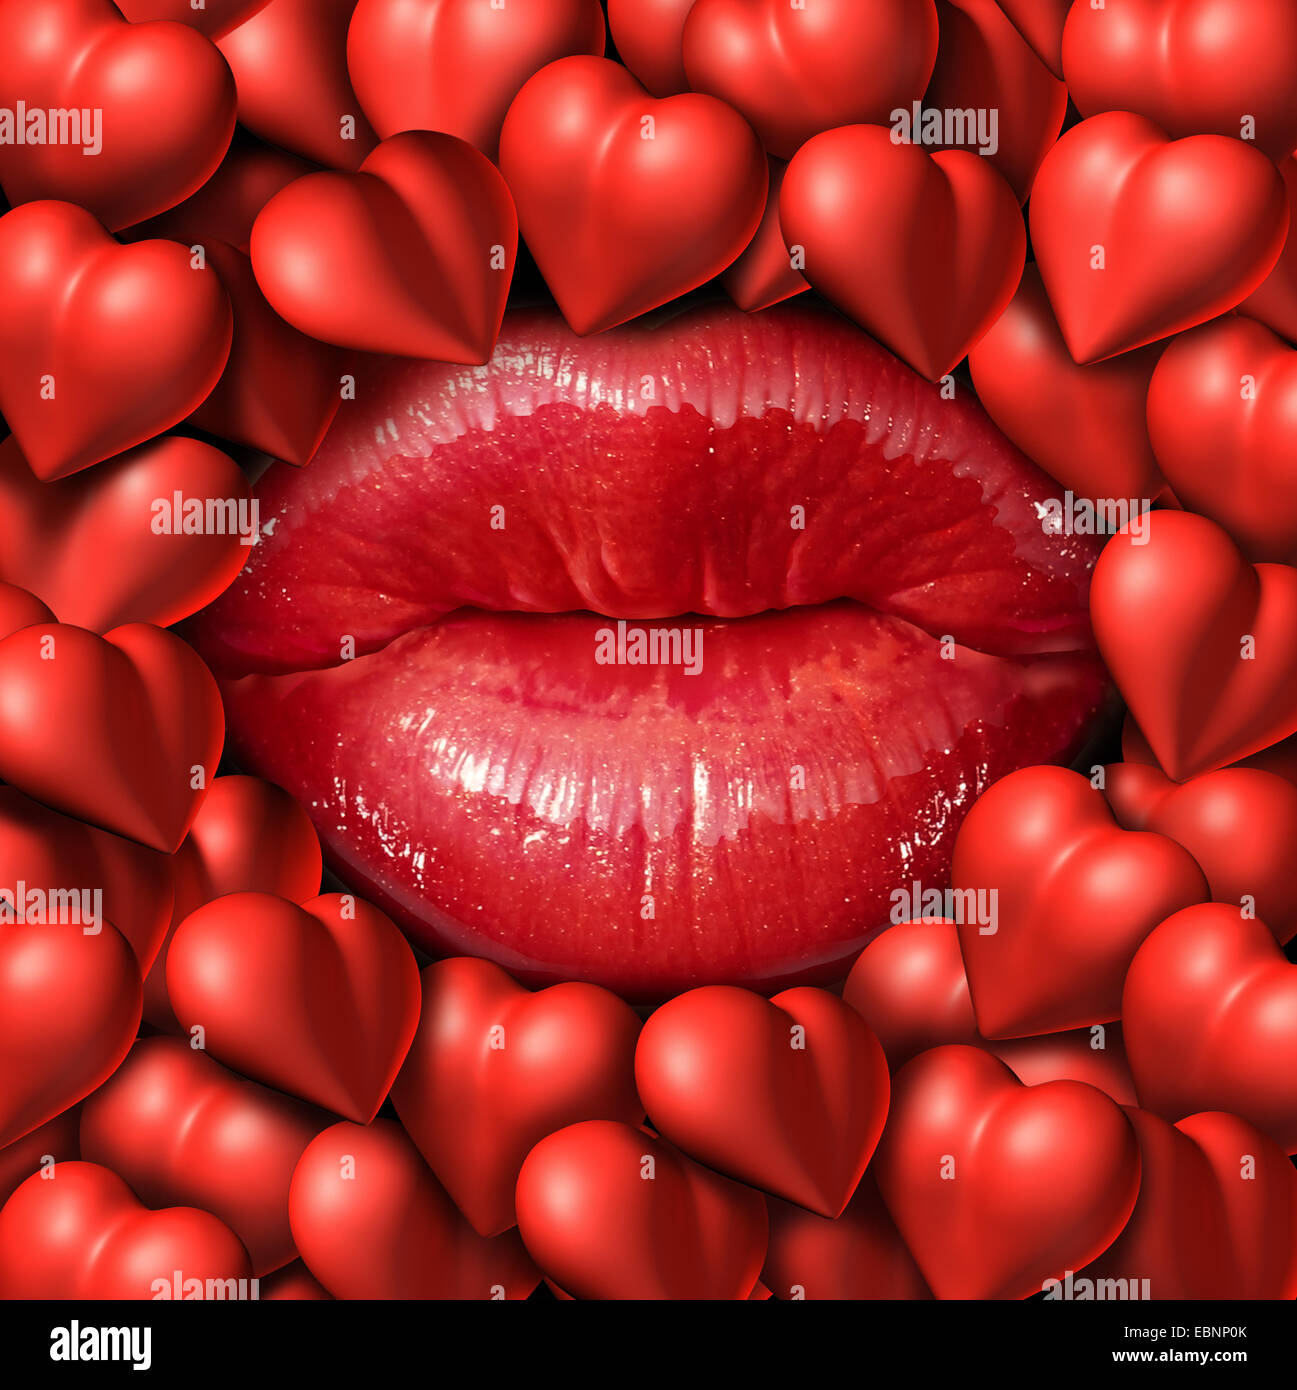 Romance concept and love symbol as red female lips surrounded by a group of heart icons representing relationship feelings and emotions of  passion. Stock Photo